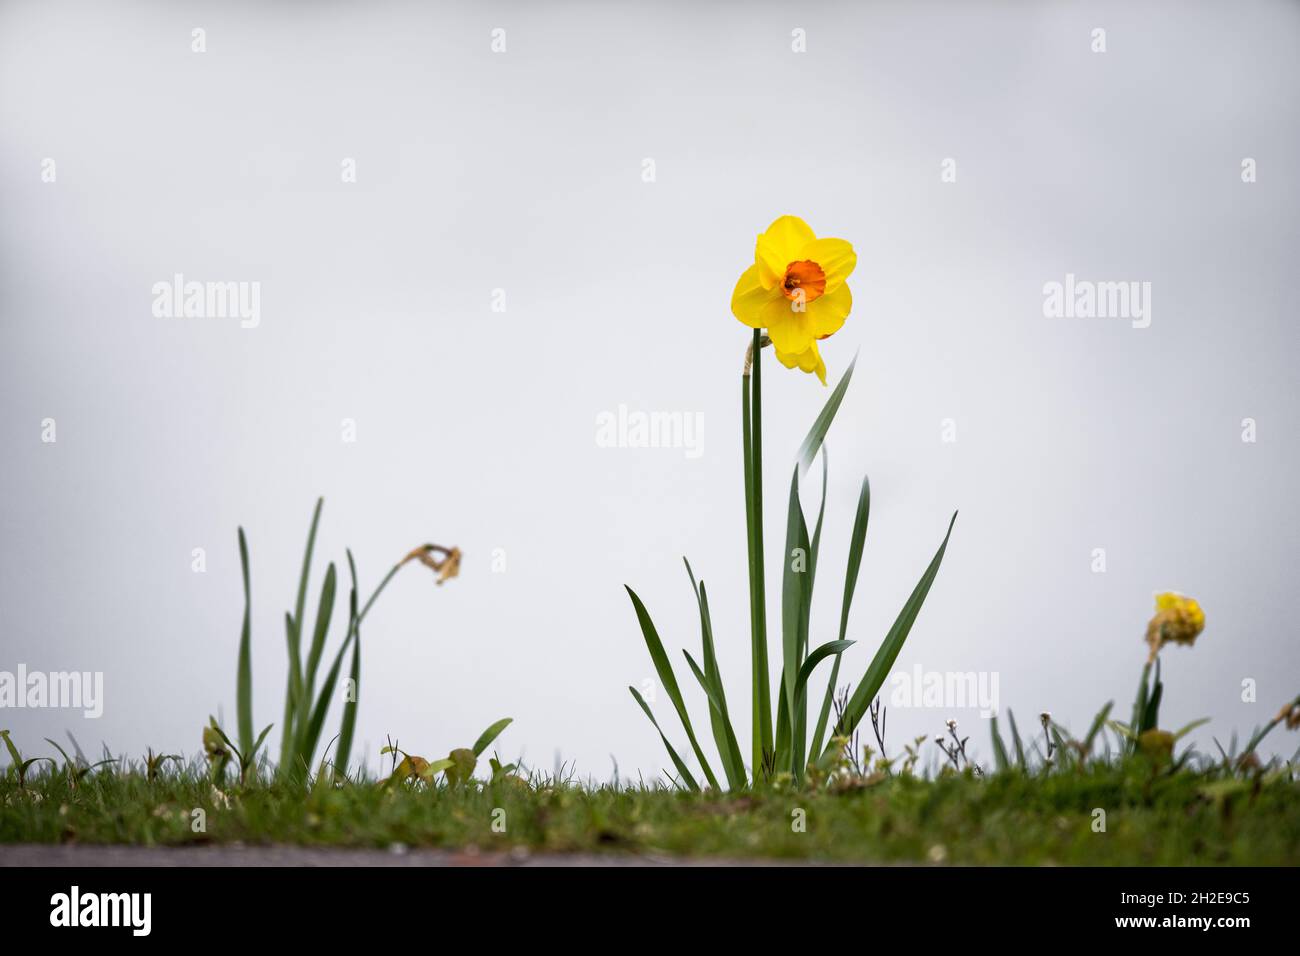 single yellow narcissus flower standing on grass in light sky Stock Photo